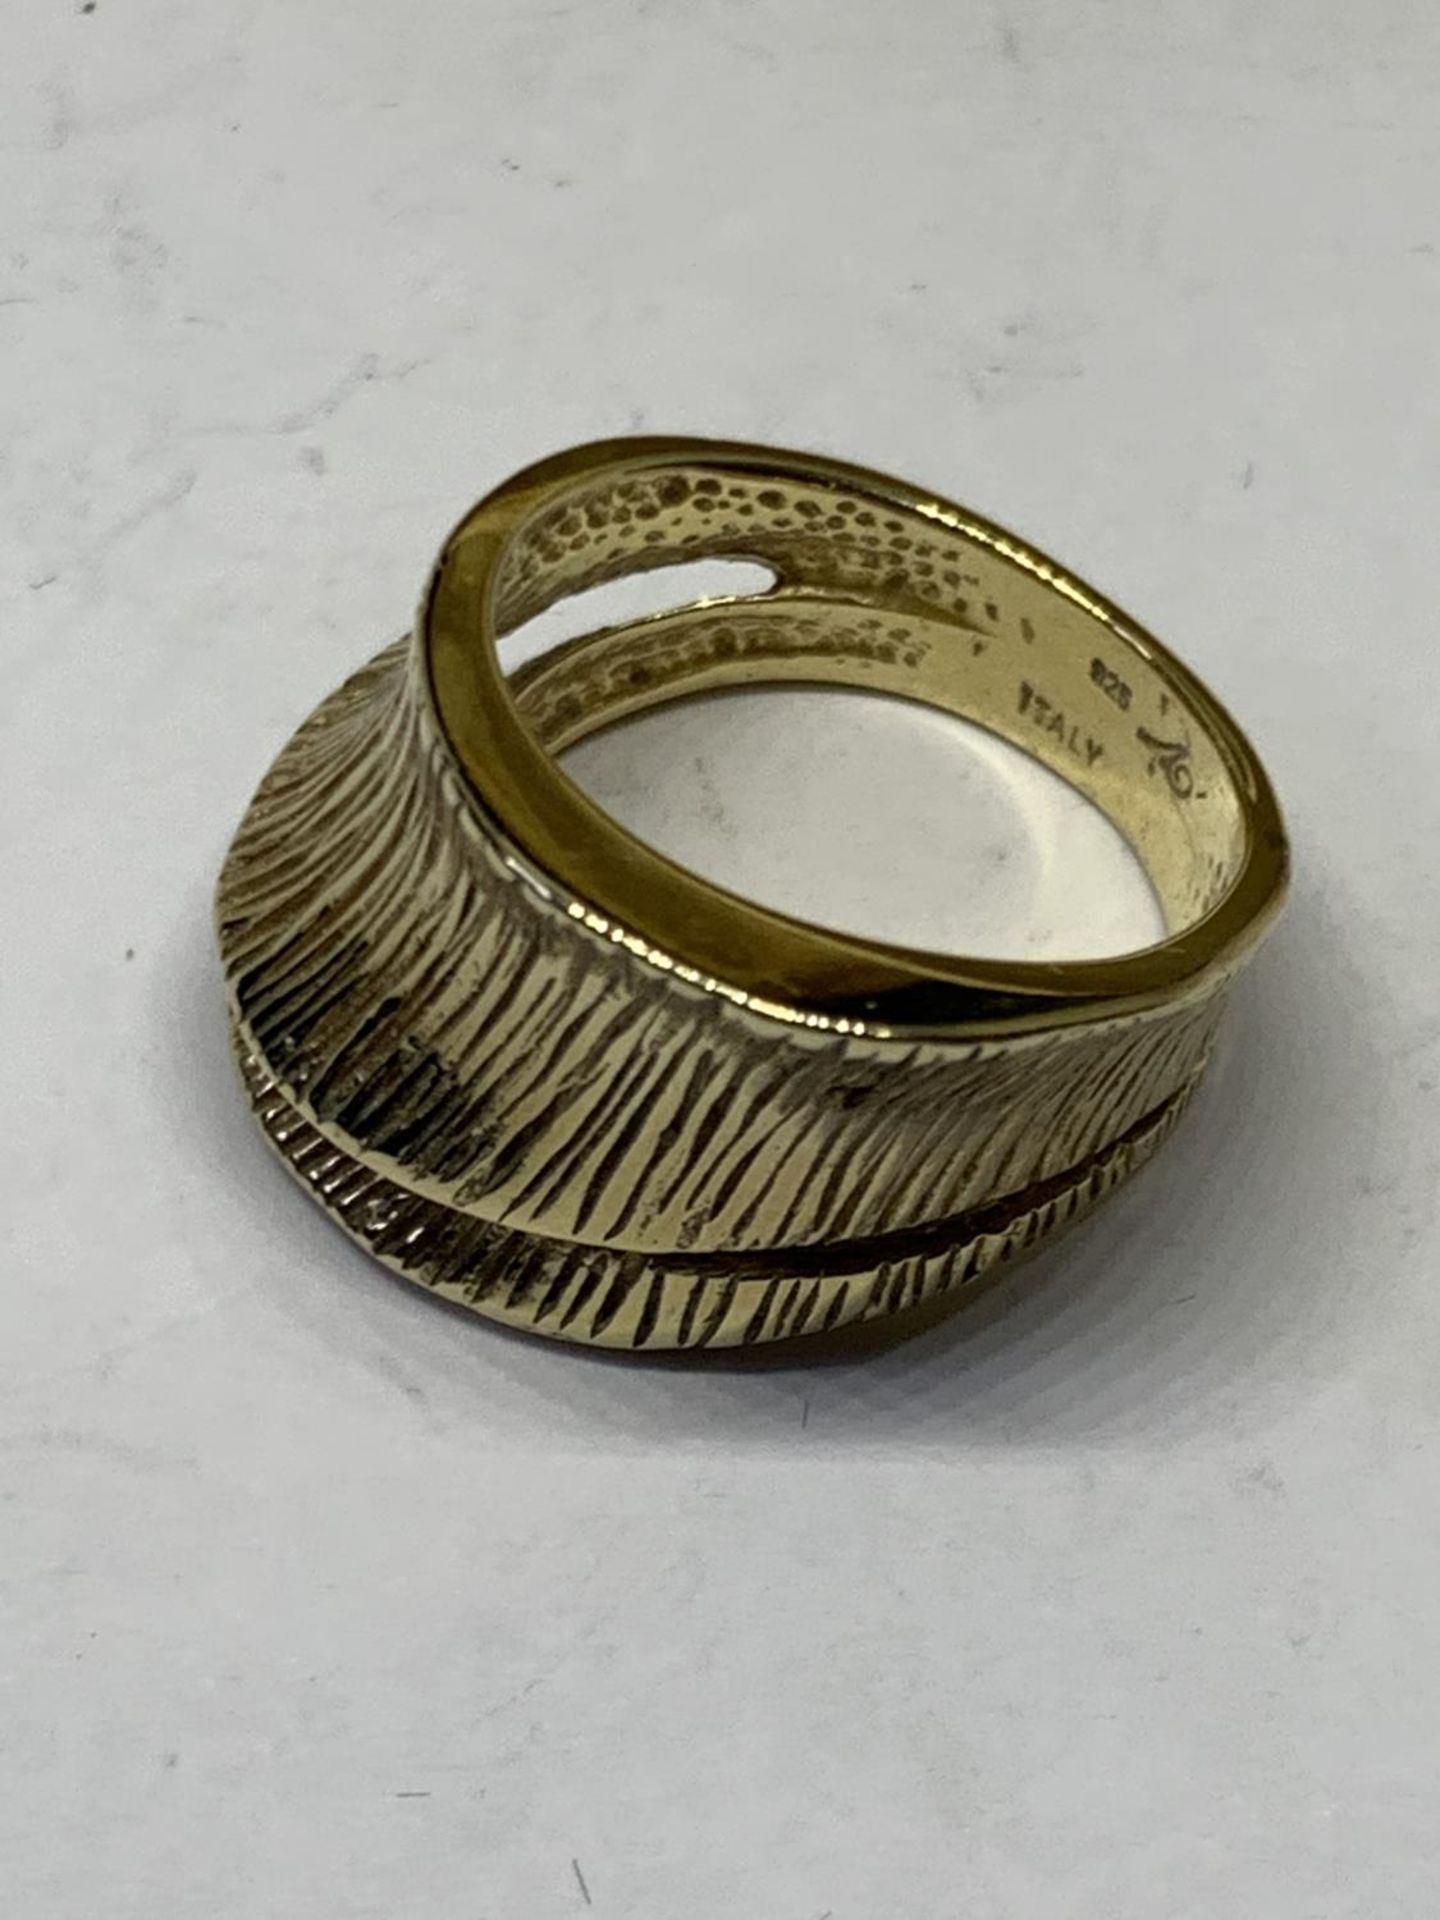 A SILVER GILT RING - Image 2 of 3